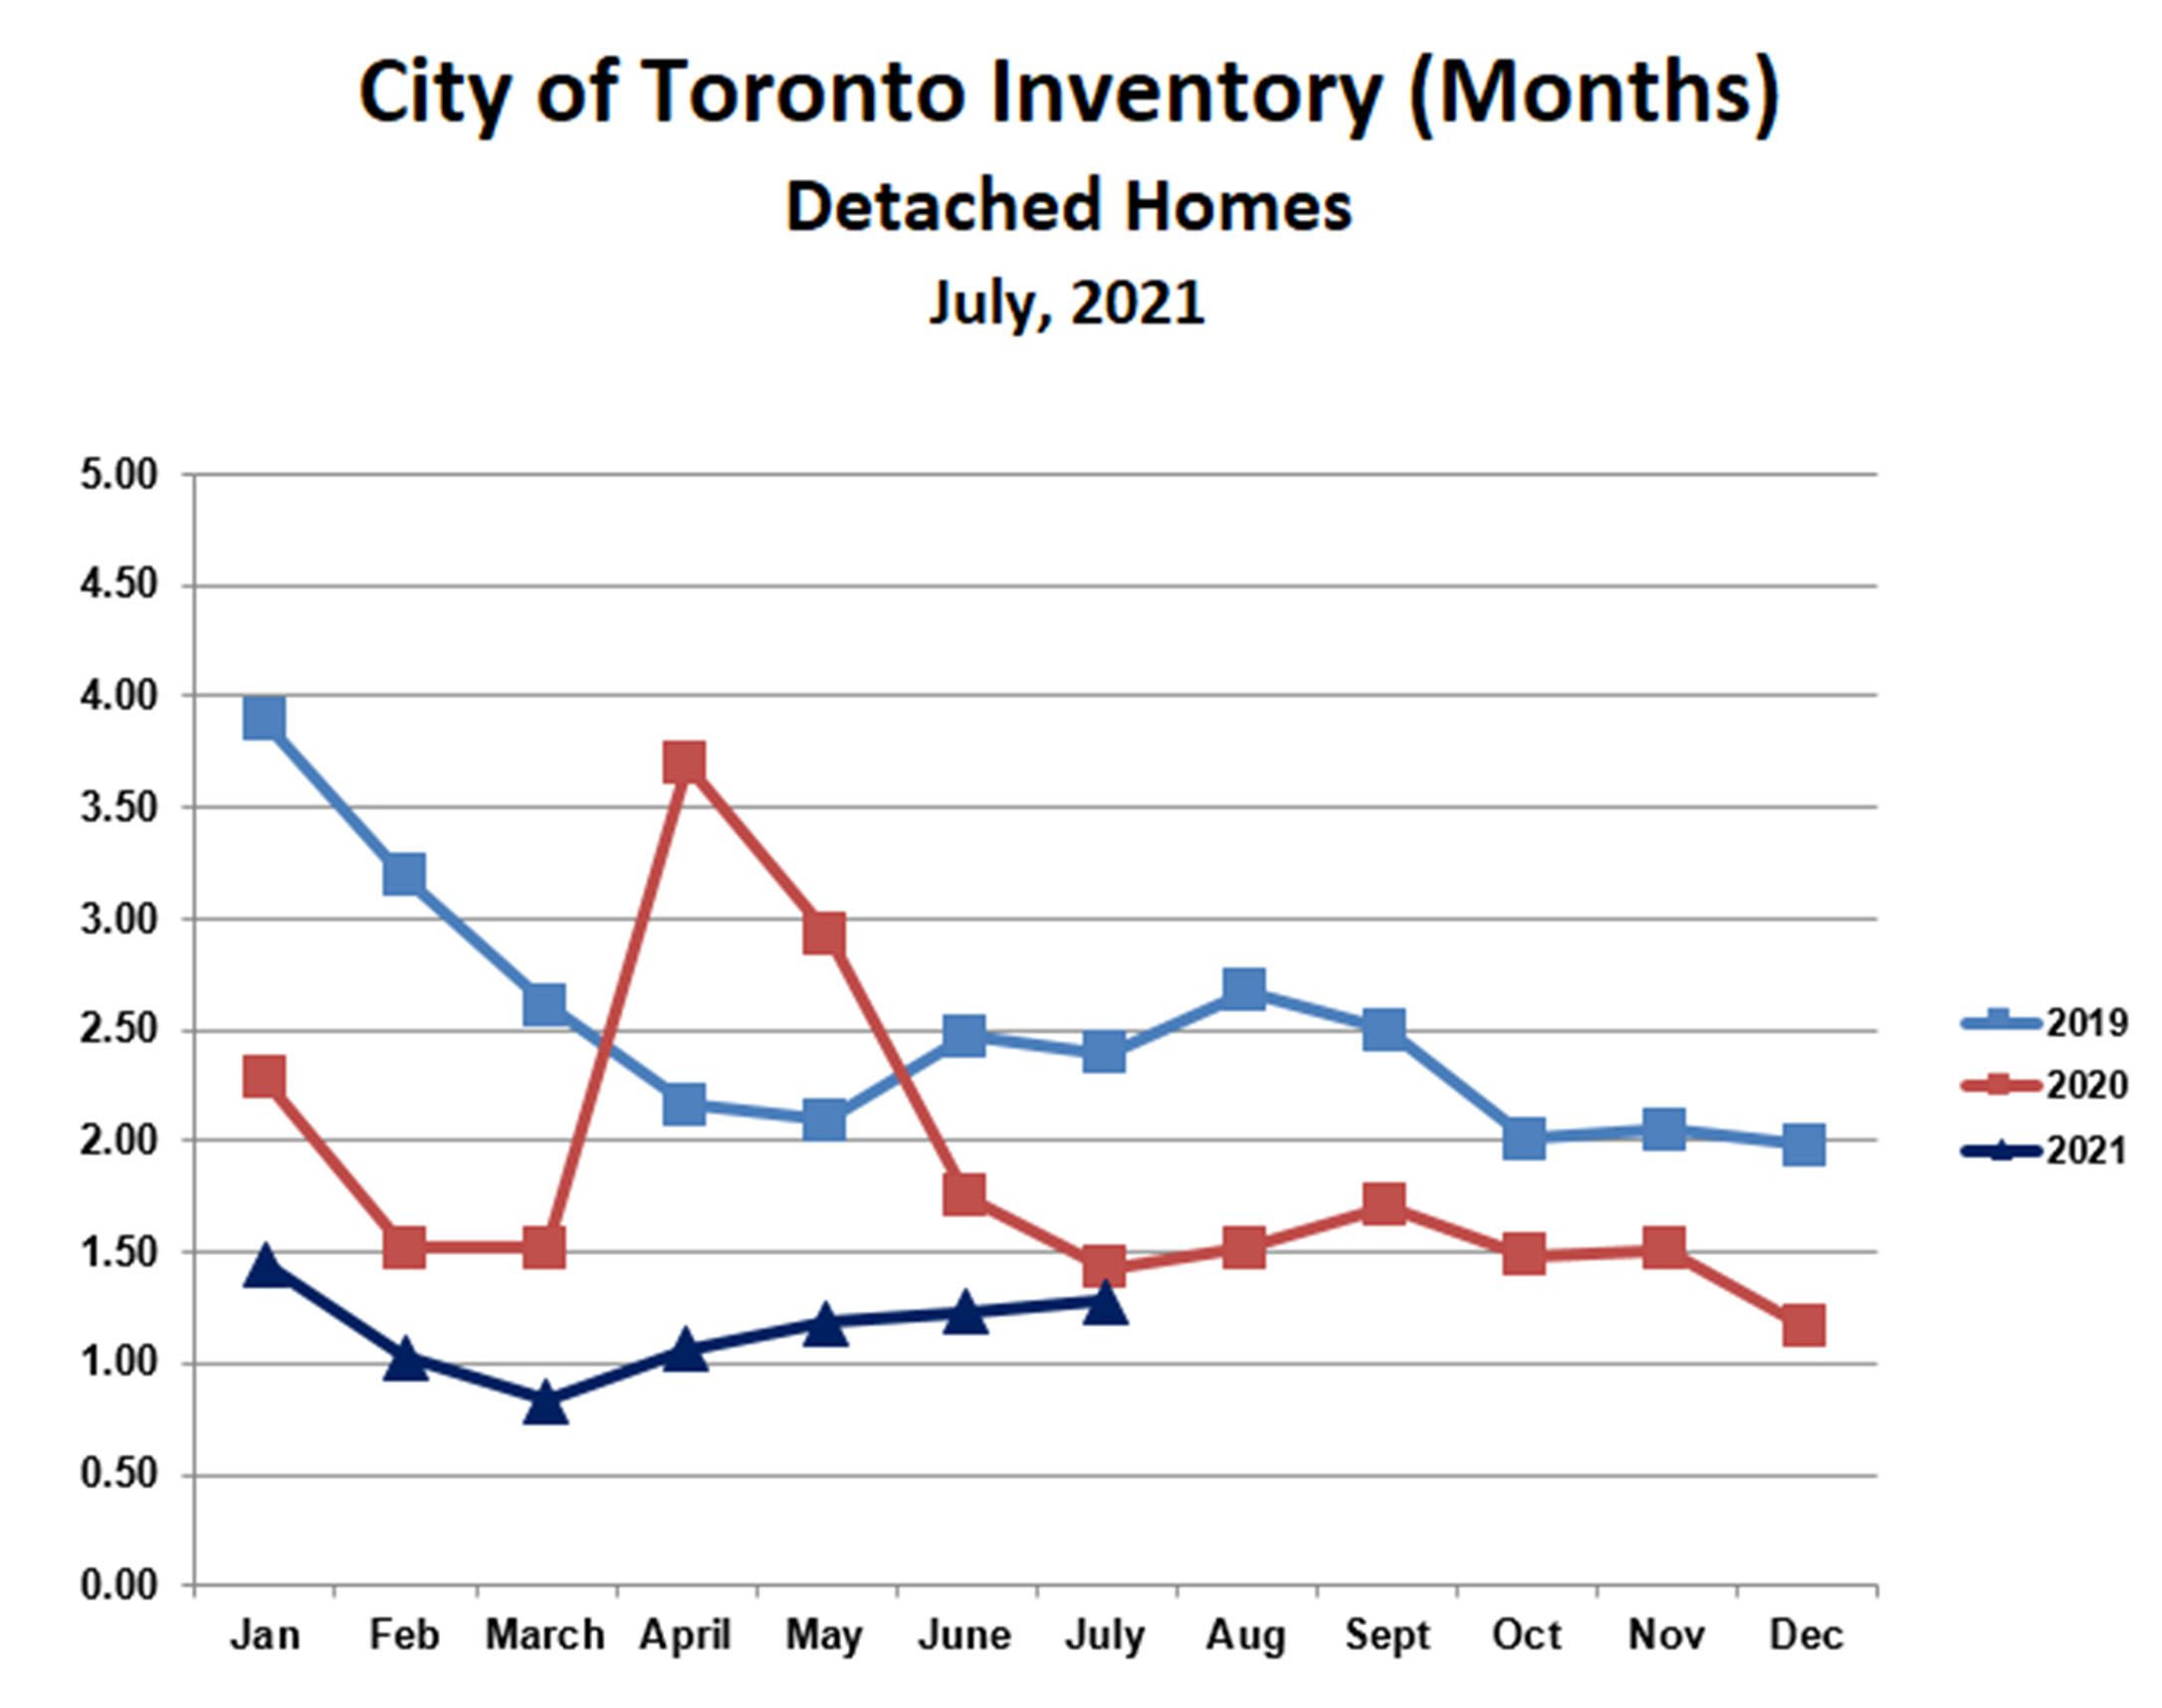 Inventory for detached homes